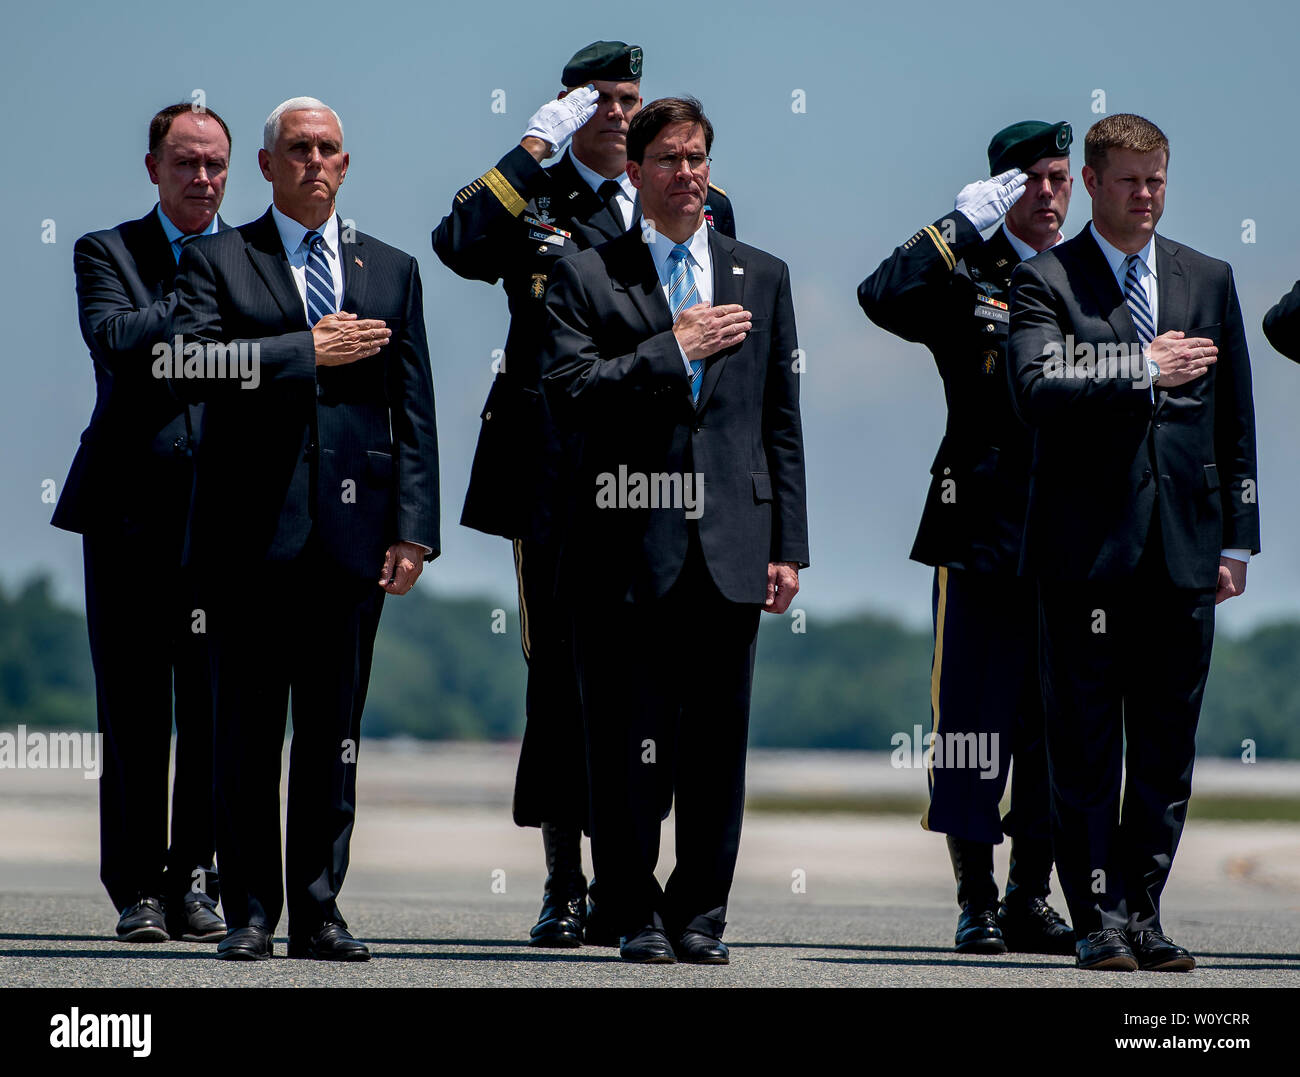 Dover, DE, USA. 28th June, 2019. June 28, 2019 : The official party salutes the transfer case during the dignified transfer of Sergeant James G. Johnston, of Trumansburg, New York, at Dover Air Force Base. The solemn ceremony was attended by numerous dignitaries including Vice President Mike Pence, Acting Secretary of Defense Dr. Mark Esper and Acting Secretary of the Army Ryan McCarthy. Scott Serio/ESW/CSM/Alamy Live News Stock Photo